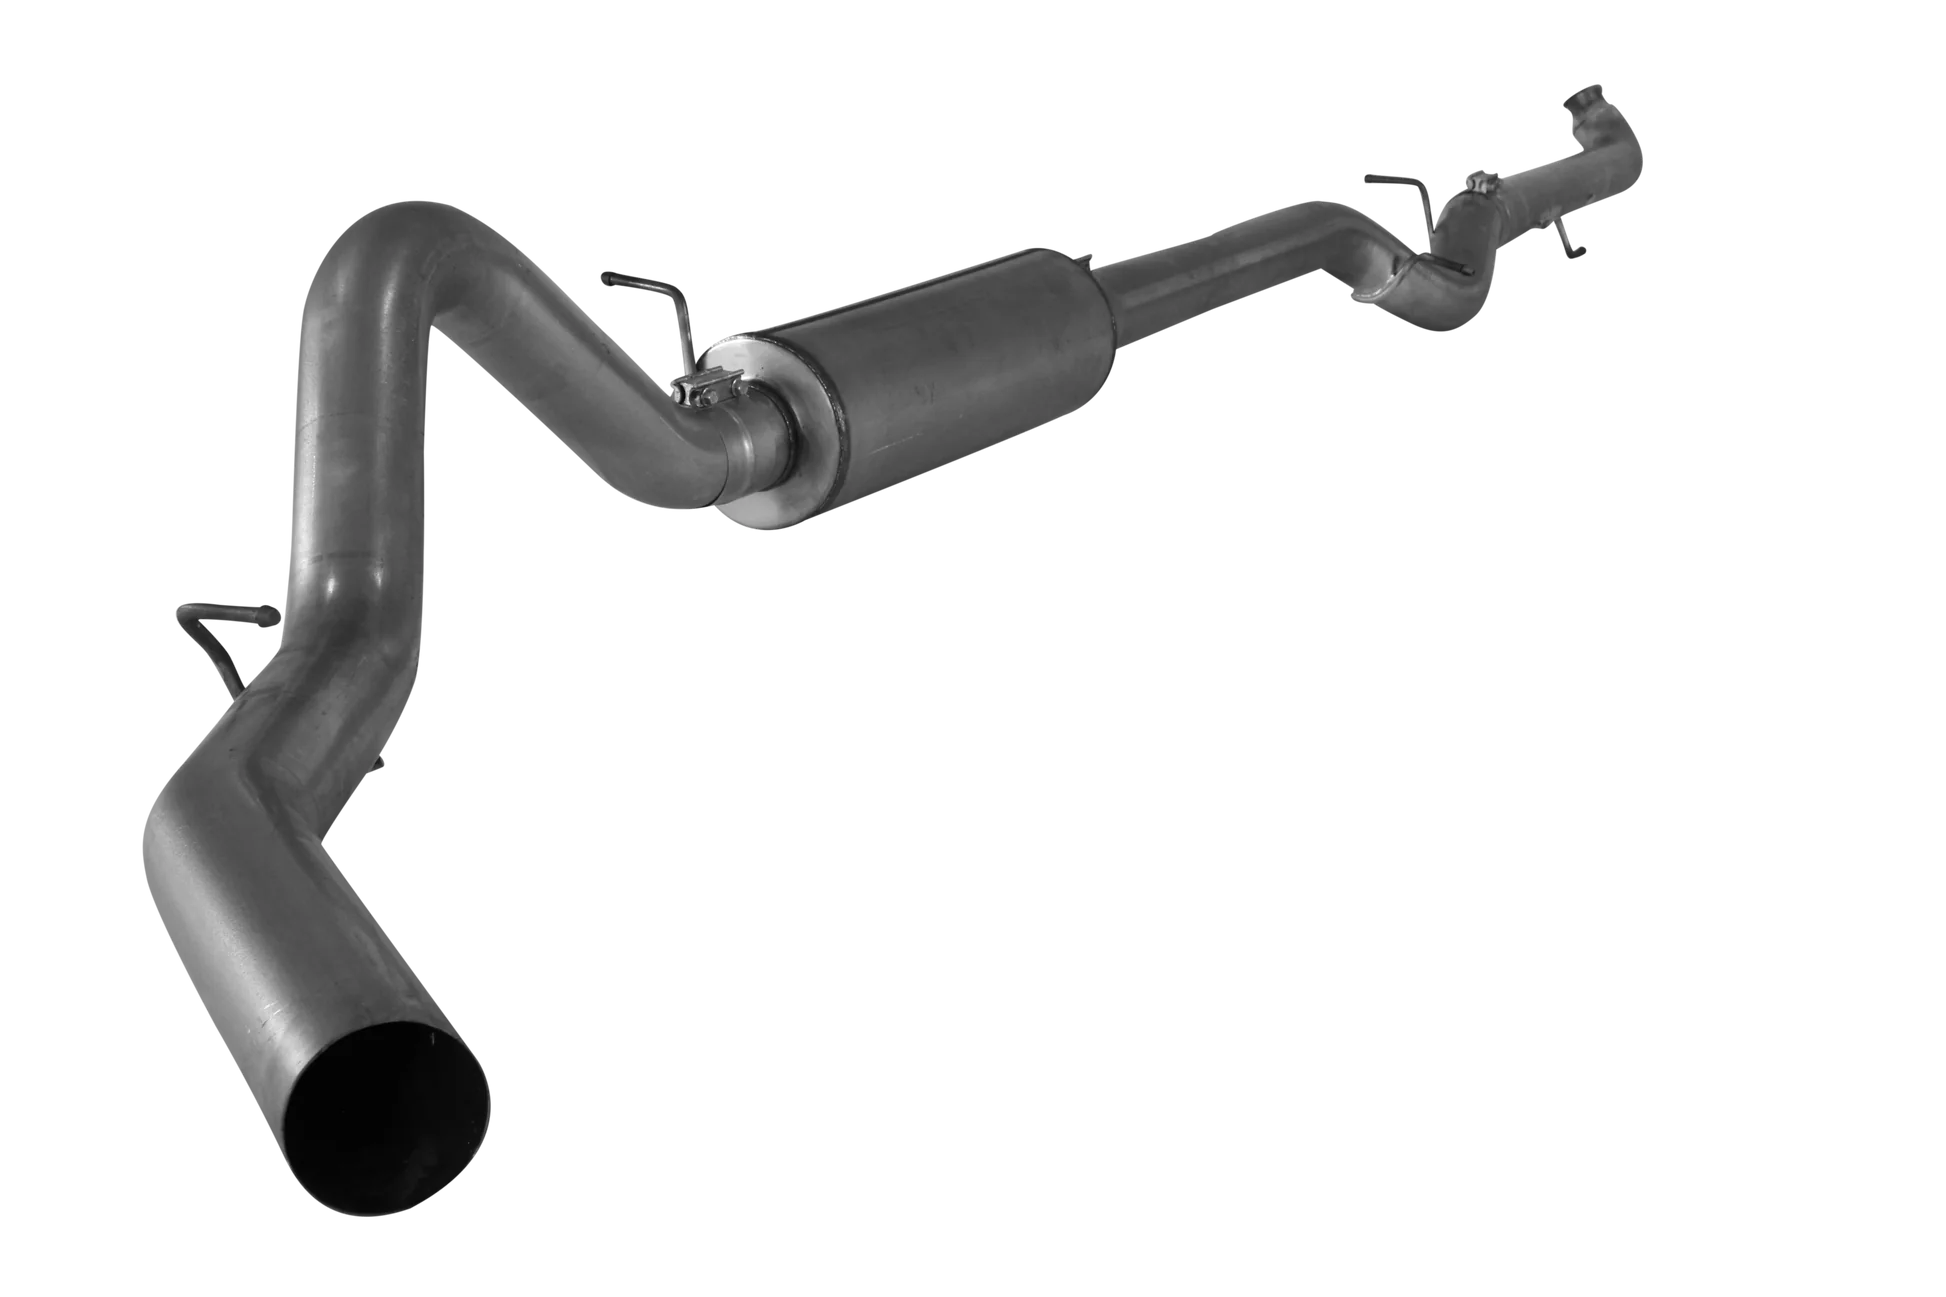 432112 432107 431112 431107 Mel's Manufacturing 4" Downpipe Back Single | 2001-2007 GM 2500/3500 6.6L DURAMAX  Mels Mfg FloPro Flo-Pro Flo Pro Hell On Wheels Performance Ltd Limited Canadian Owned and Operated Online Diesel Parts Distribution & Wholesale Supply Center in Alberta Canada Shipping Supplying to Alberta British Columbia Sask Saskatchewan Manitoba Ontario Quebec Newfoundland Labrador New Brunswick Nova Scotia Prince Edward Island AB BC SK MB ON QC PQ NS NB NFLD N.L. PEI